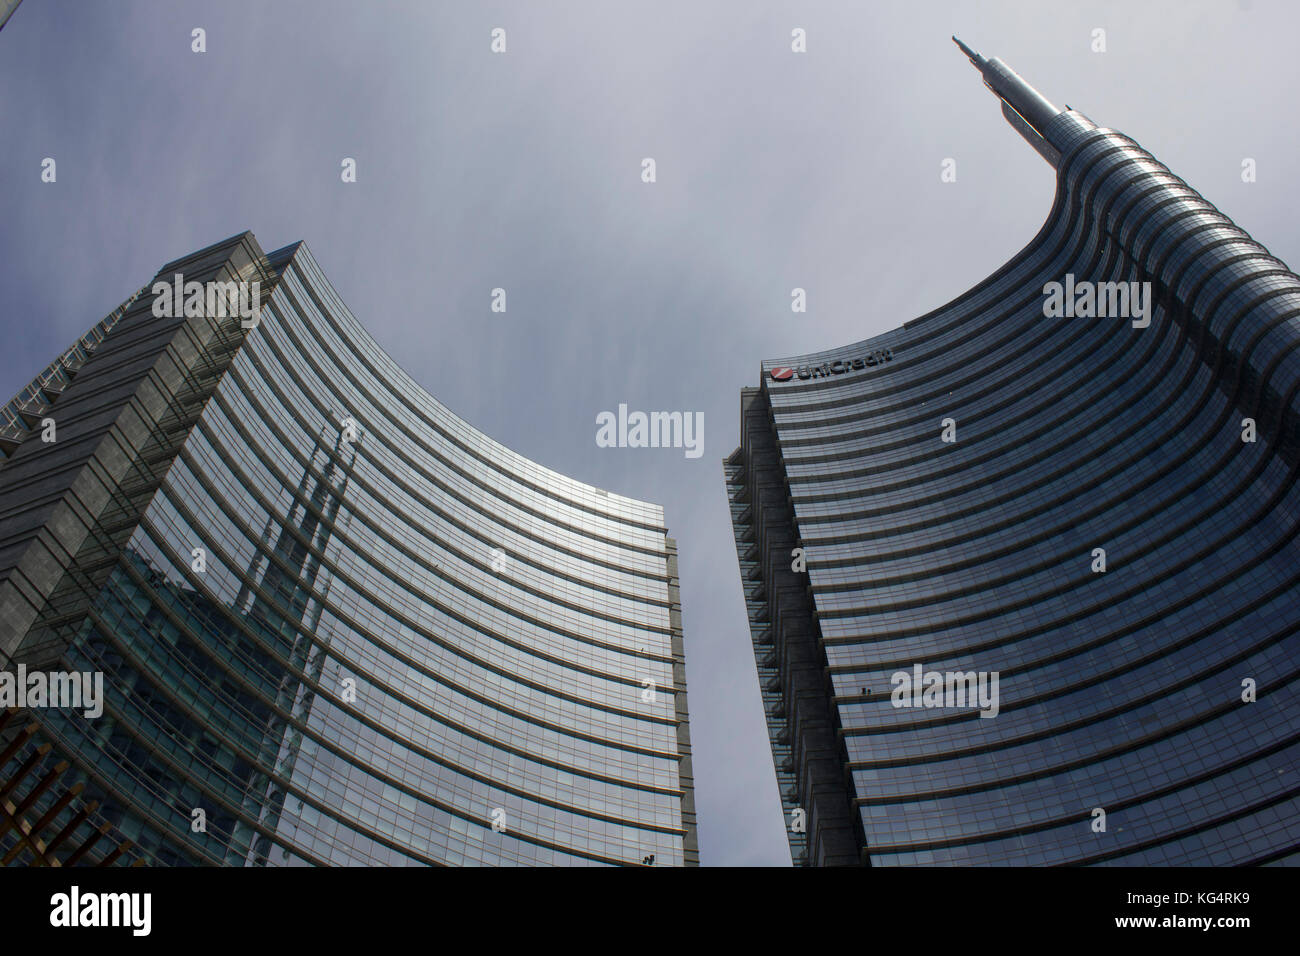 MILAN, ITALY - MAY 10 2014: Architectural detail of the glass facade on the Unicredit tower building in Milan, the tallest skyscraper in Italy Stock Photo